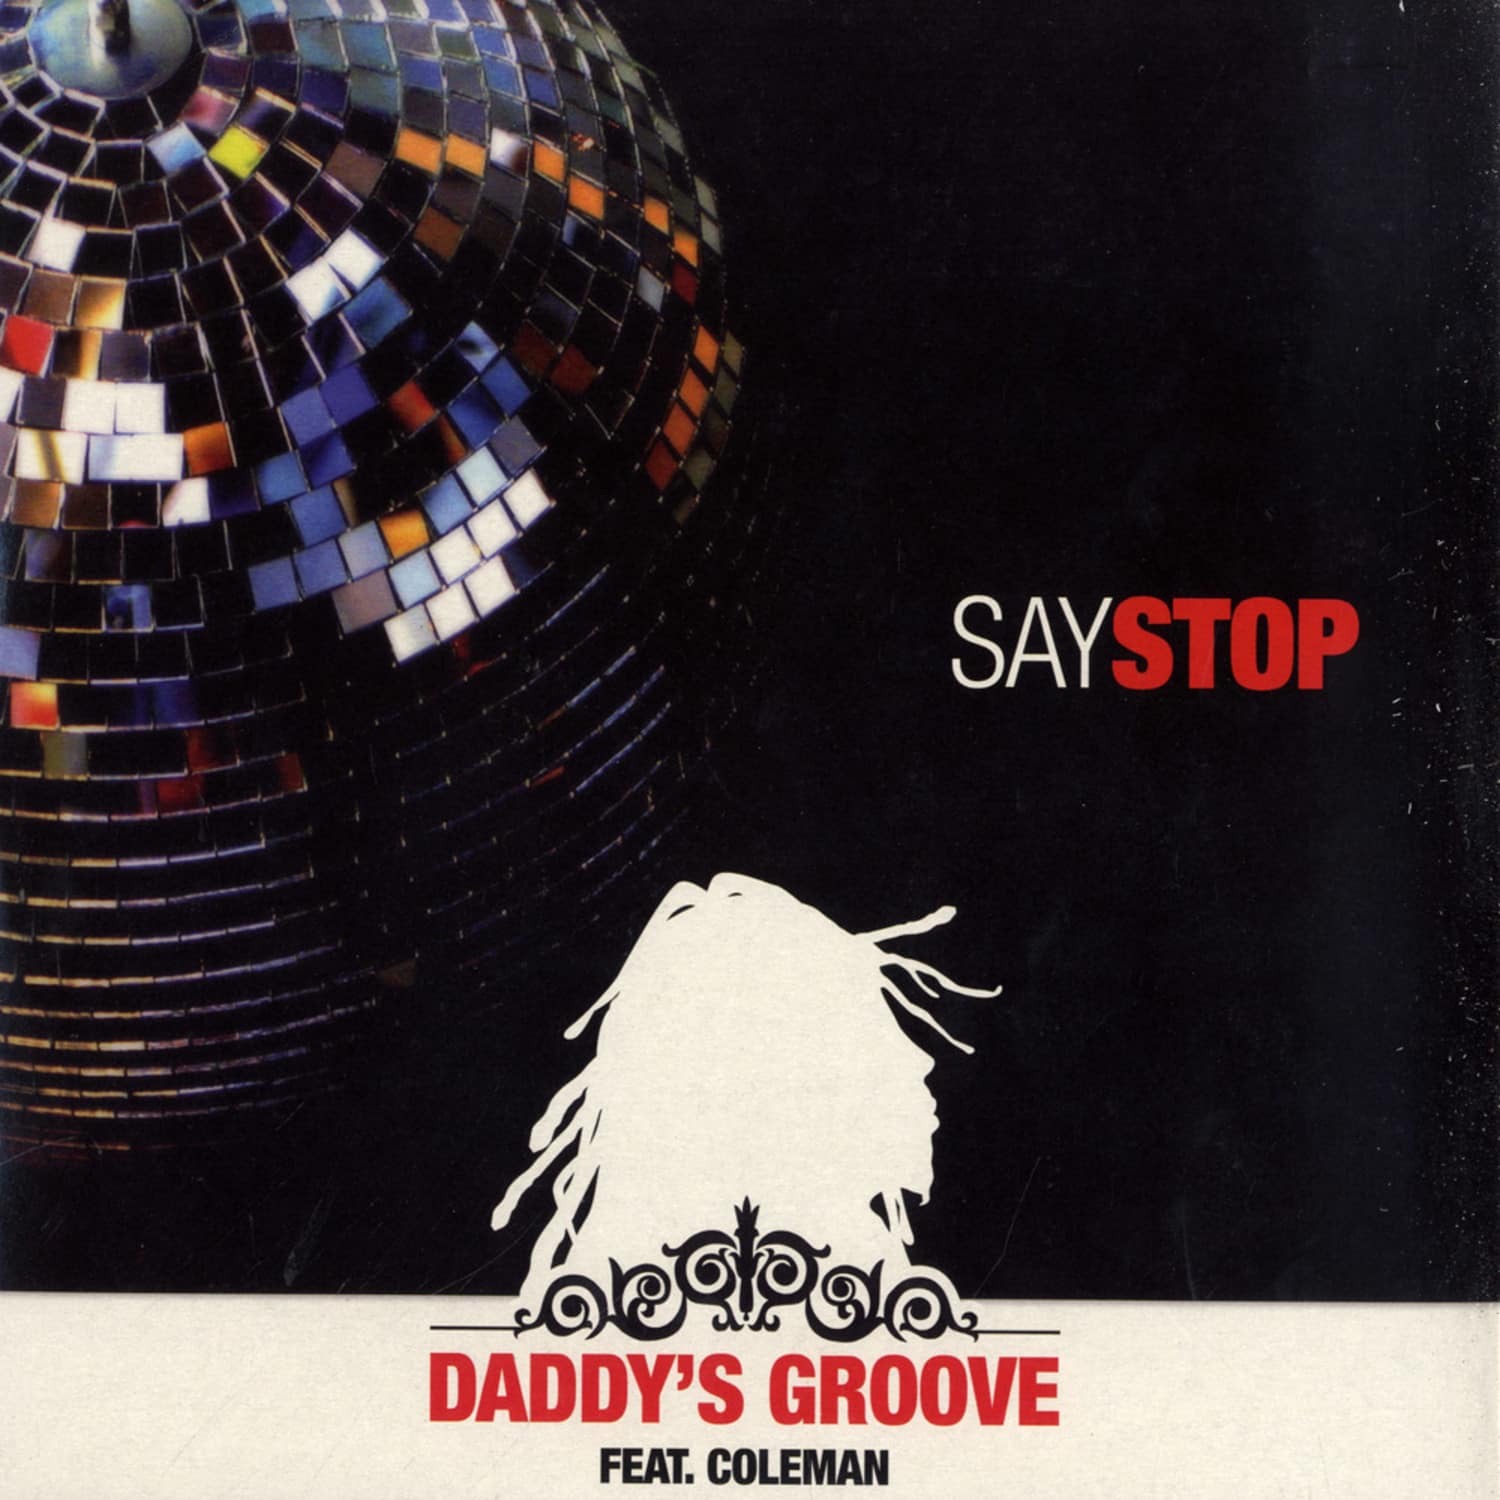 Daddys Groove feat. Coleman - SAY STOP